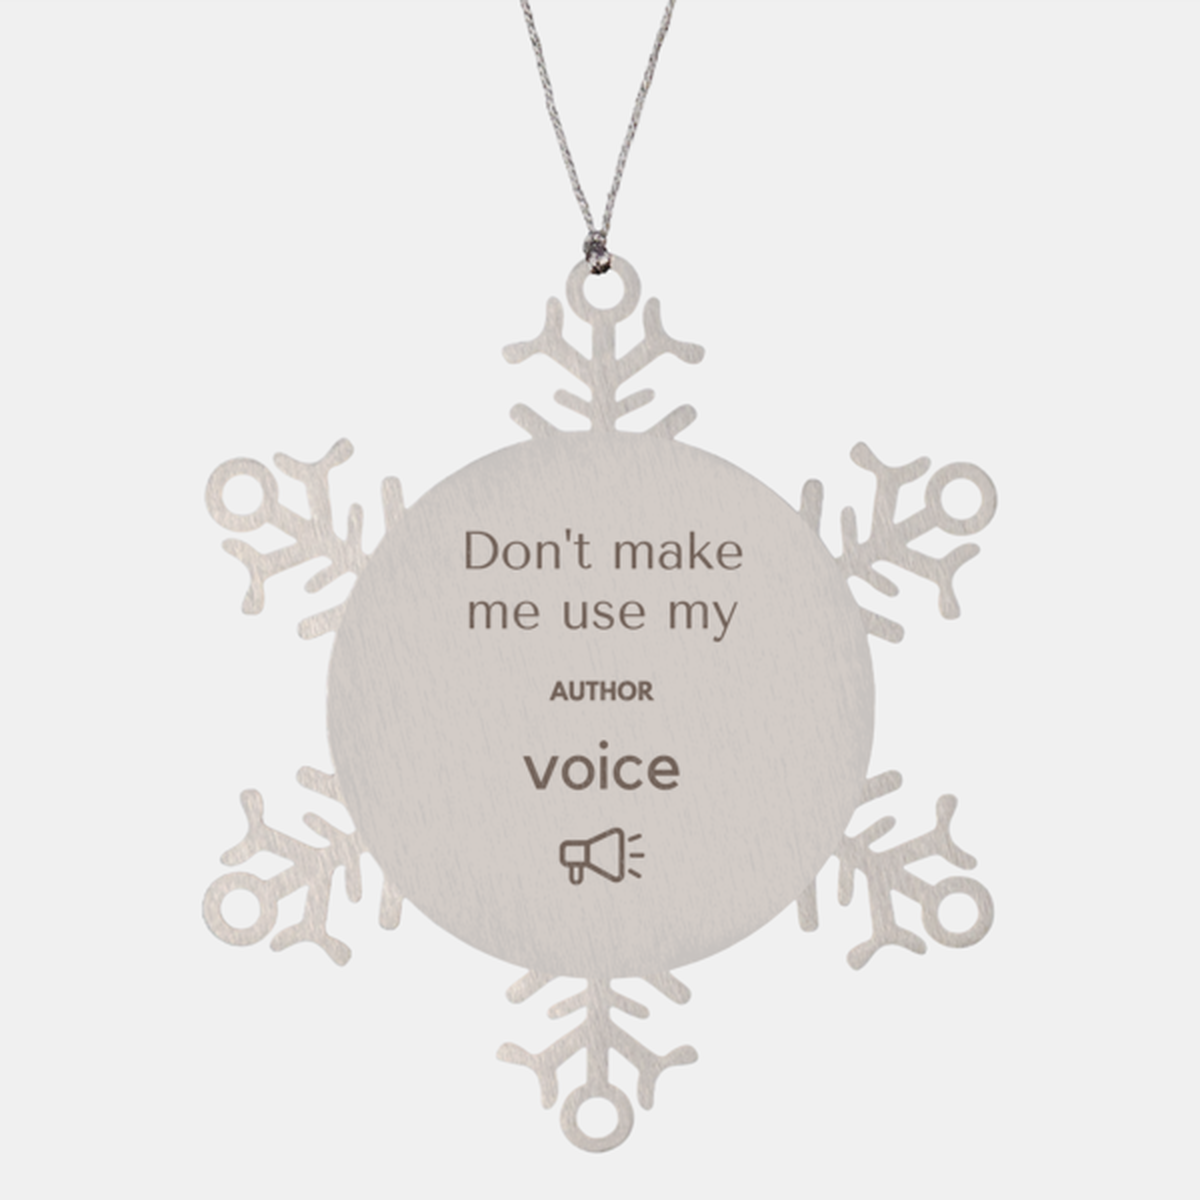 Don't make me use my Author voice, Sarcasm Author Ornament Gifts, Christmas Author Snowflake Ornament Unique Gifts For Author Coworkers, Men, Women, Colleague, Friends